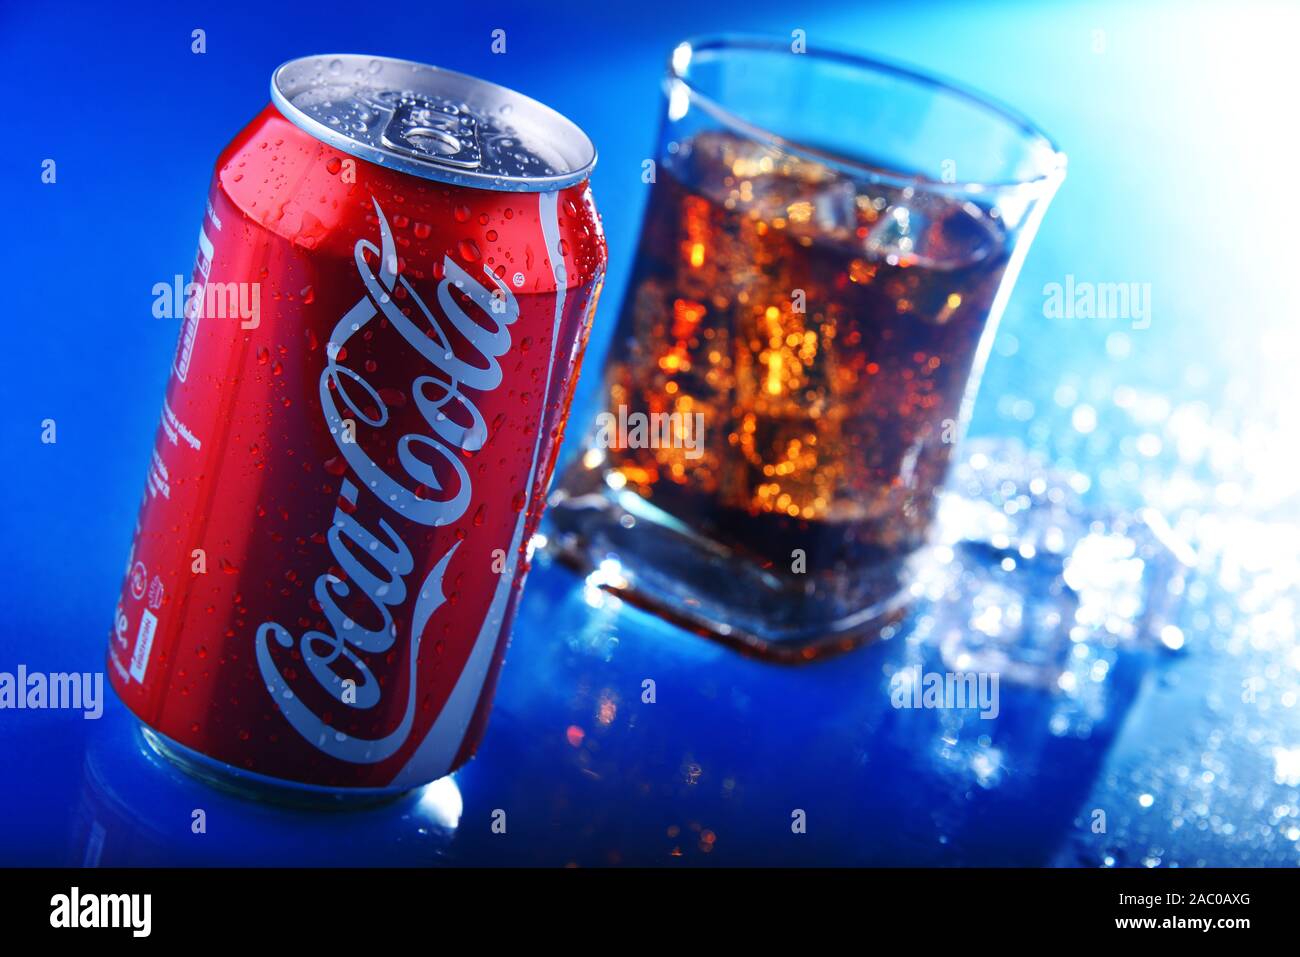 POZNAN, POL - NOV 22, 2019: Can and glass of Coca-Cola, a carbonated soft drink manufactured by The Coca-Cola Company headquartered in Atlanta, Georgi Stock Photo